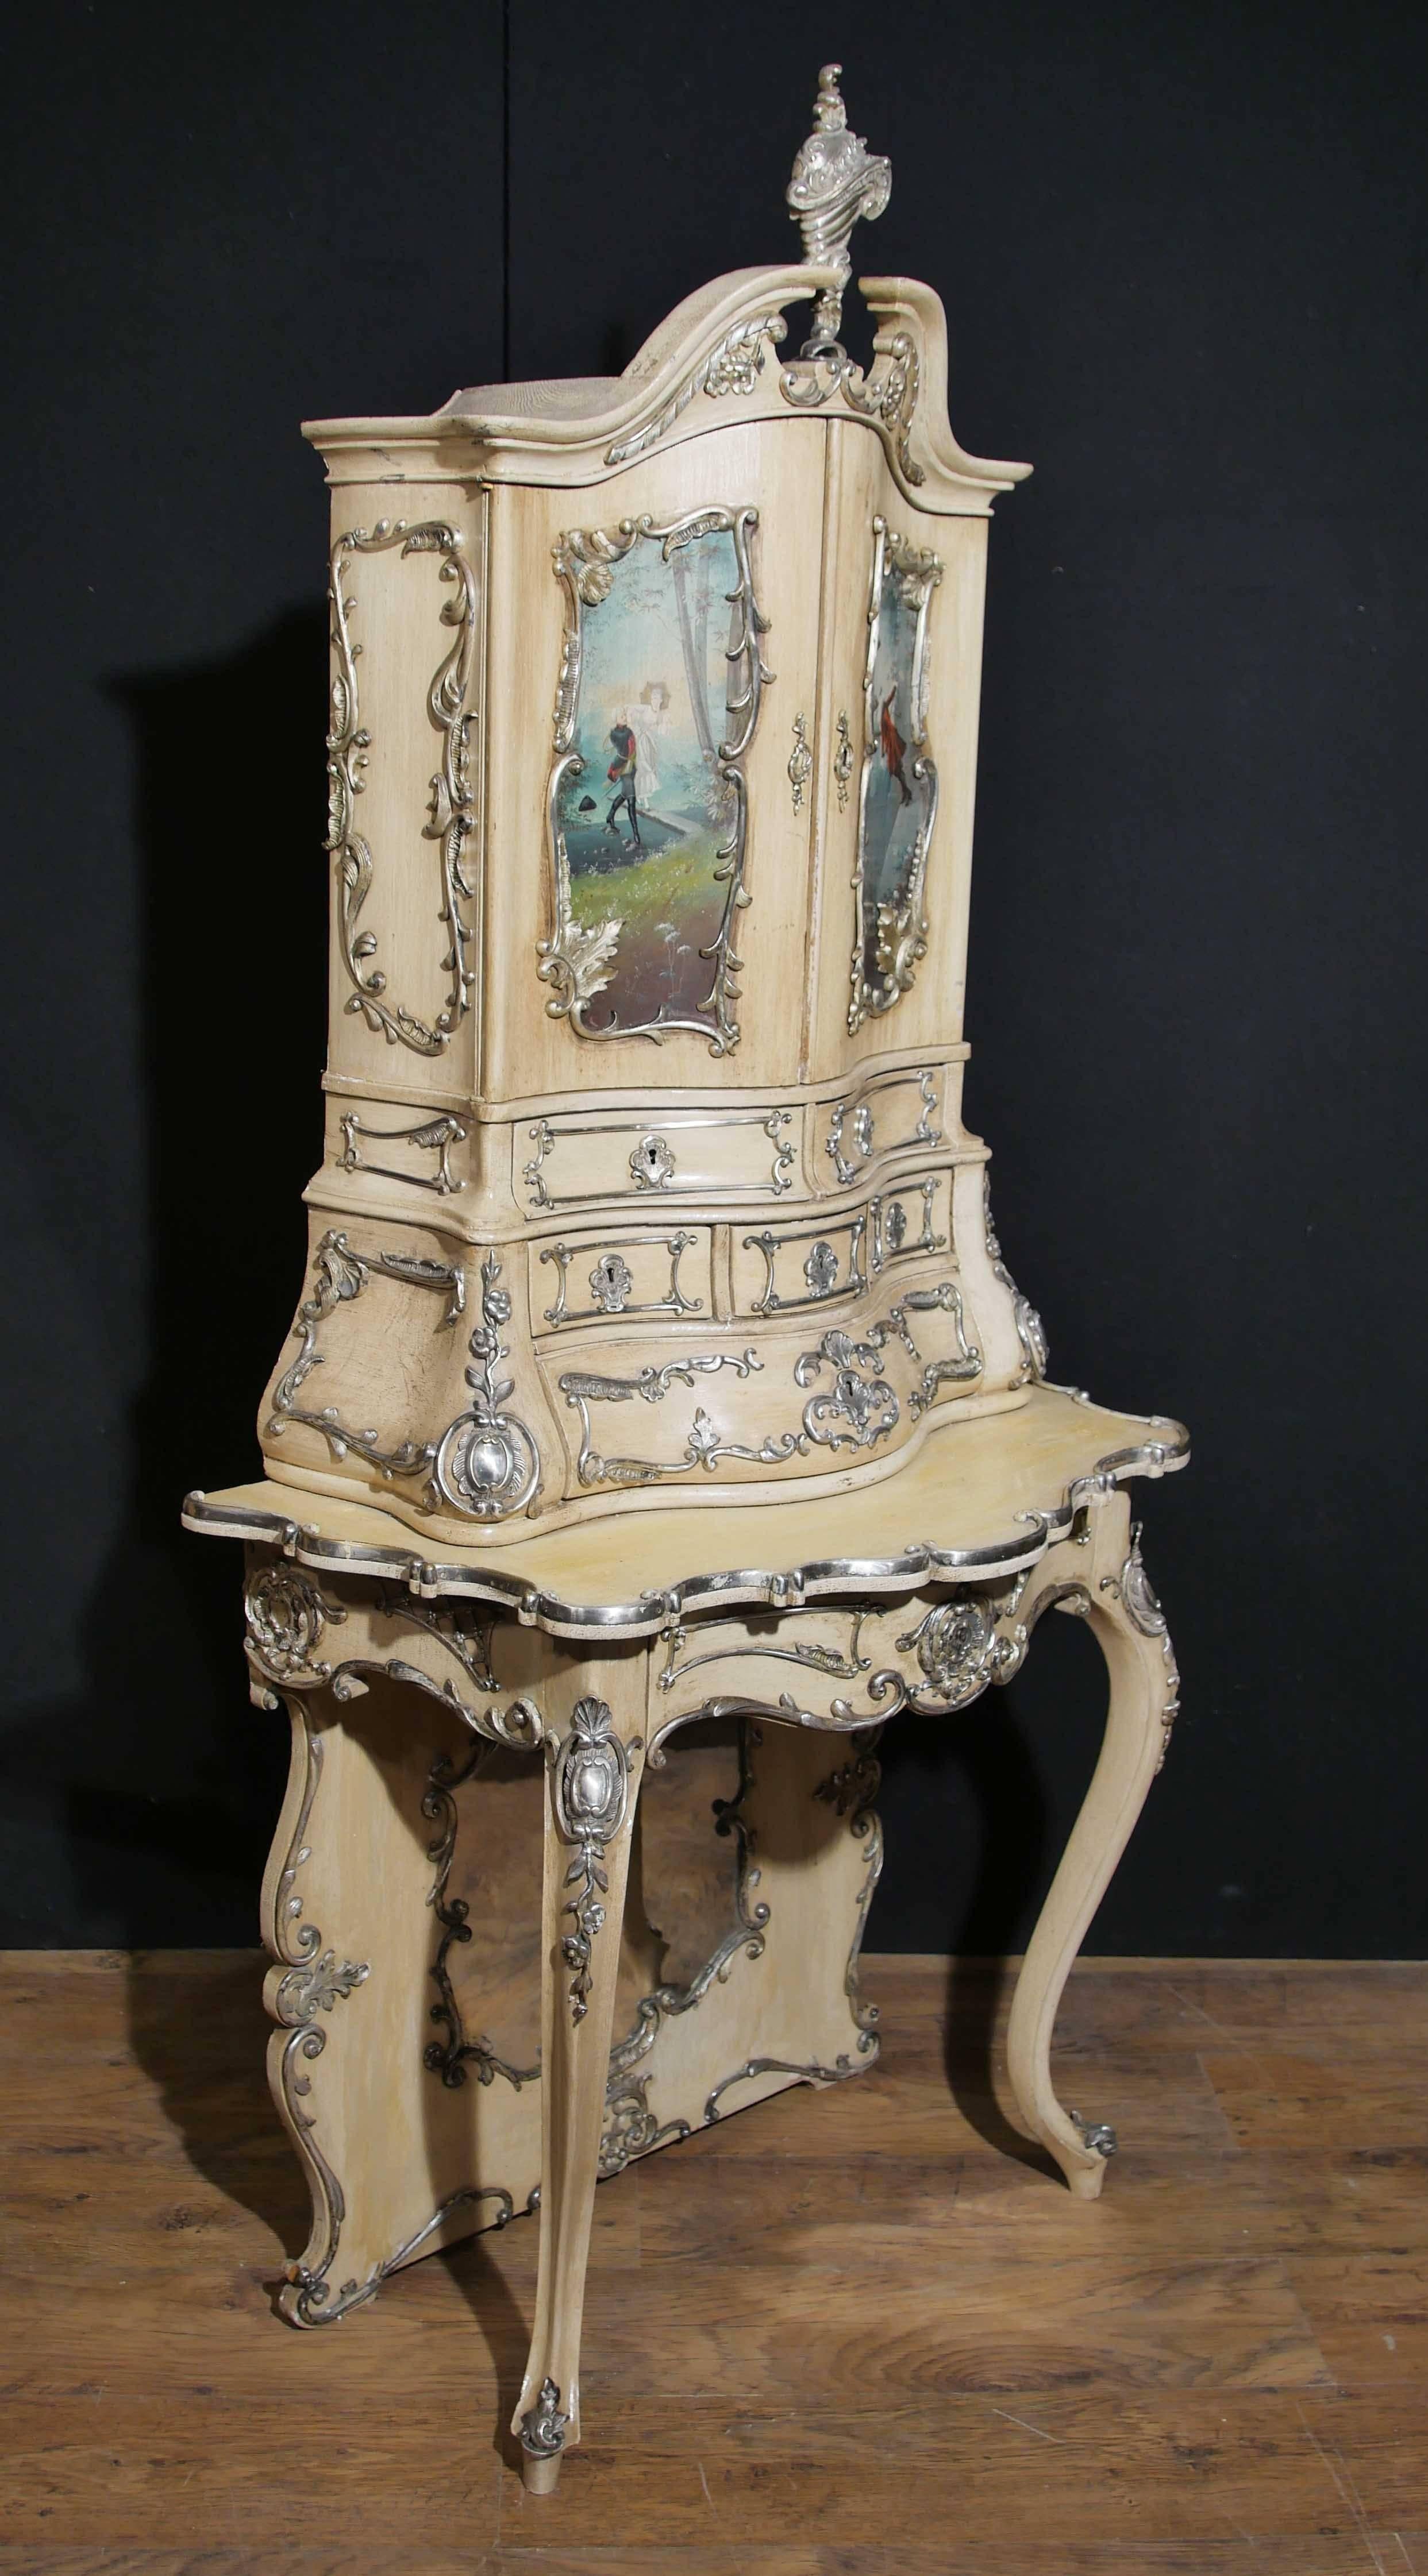 - Gorgeous antique Italian Florentine cabinet or bureau.
- Lovely painted finish in cream.
- This cabinet has the unusual feature of having silver plated bronze mounts.
- Painted panels show various scenes of Florentine courtly love.
- Really